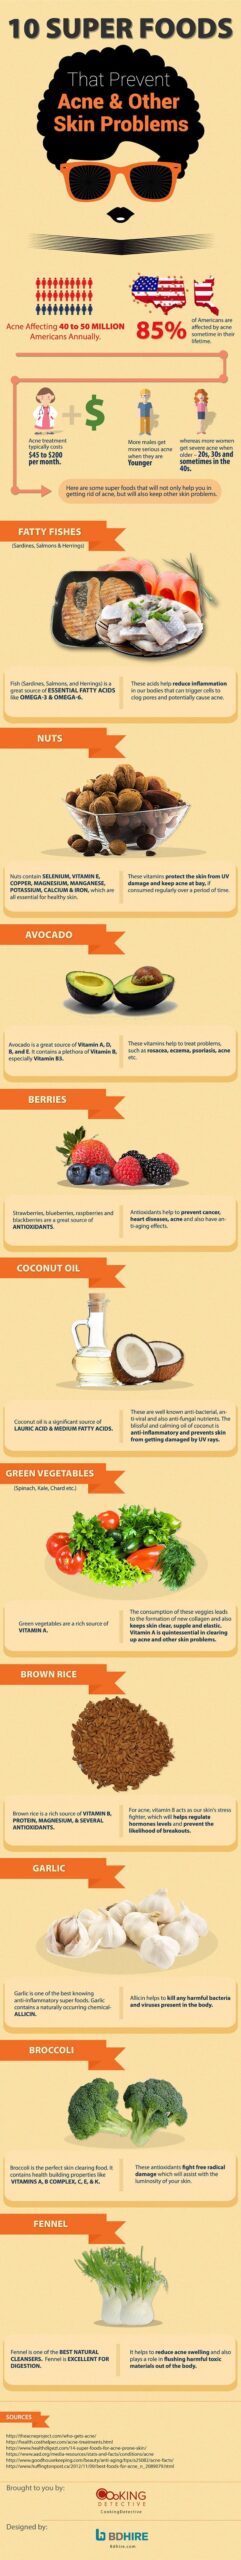 10-Super-Foods-that-Prevent-Acne-&-Other-Skin-Problems